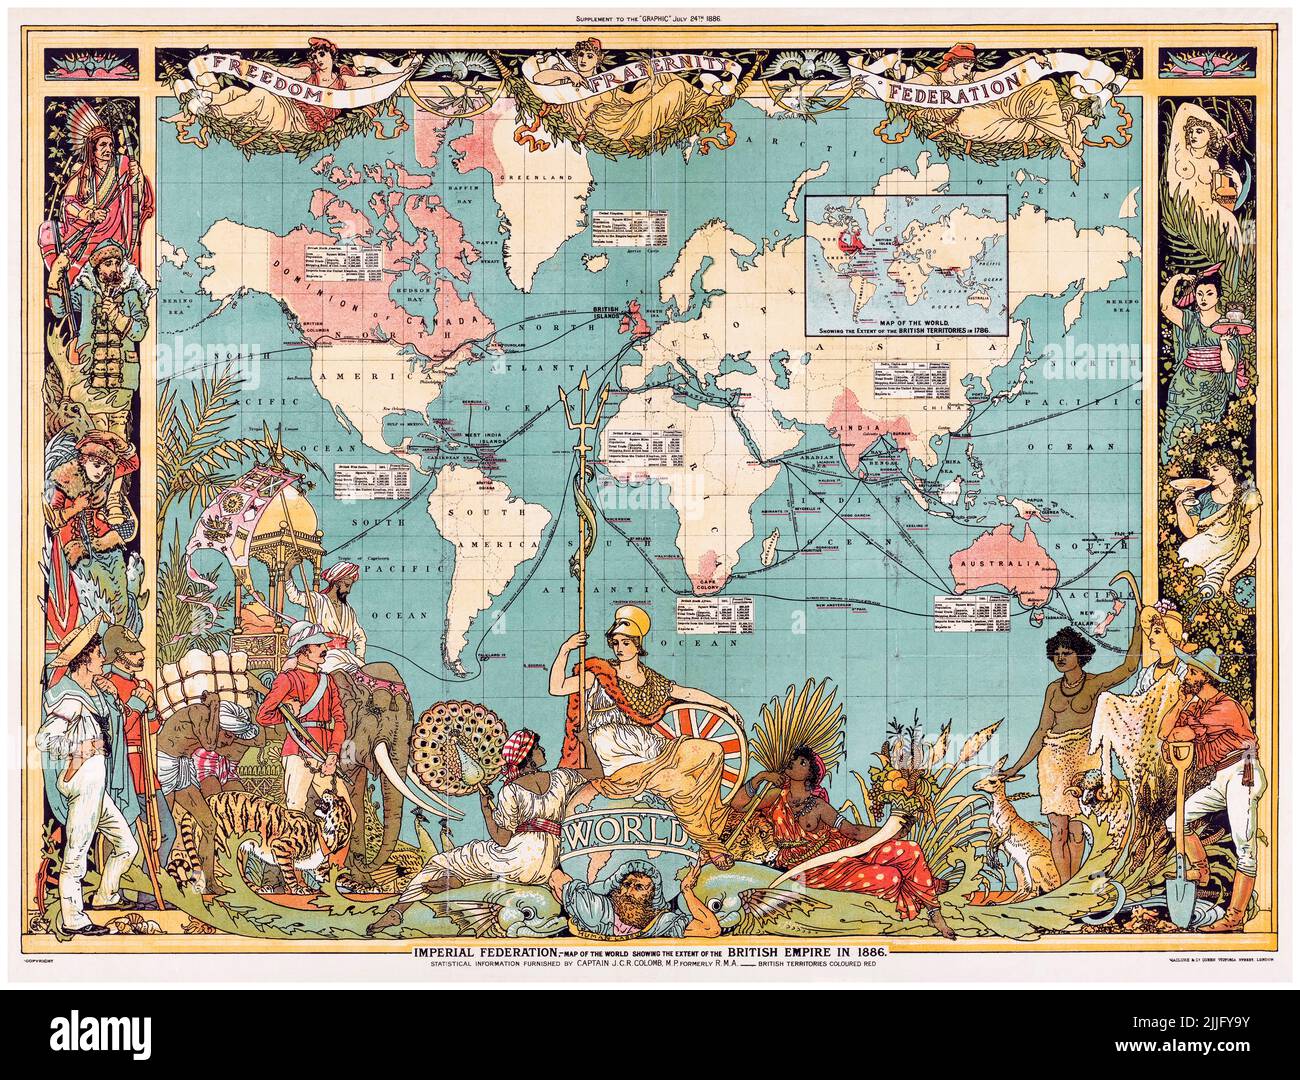 19th Century Vintage World Map of the Colonial British Empire in 1886 by Walter Crane Stock Photo